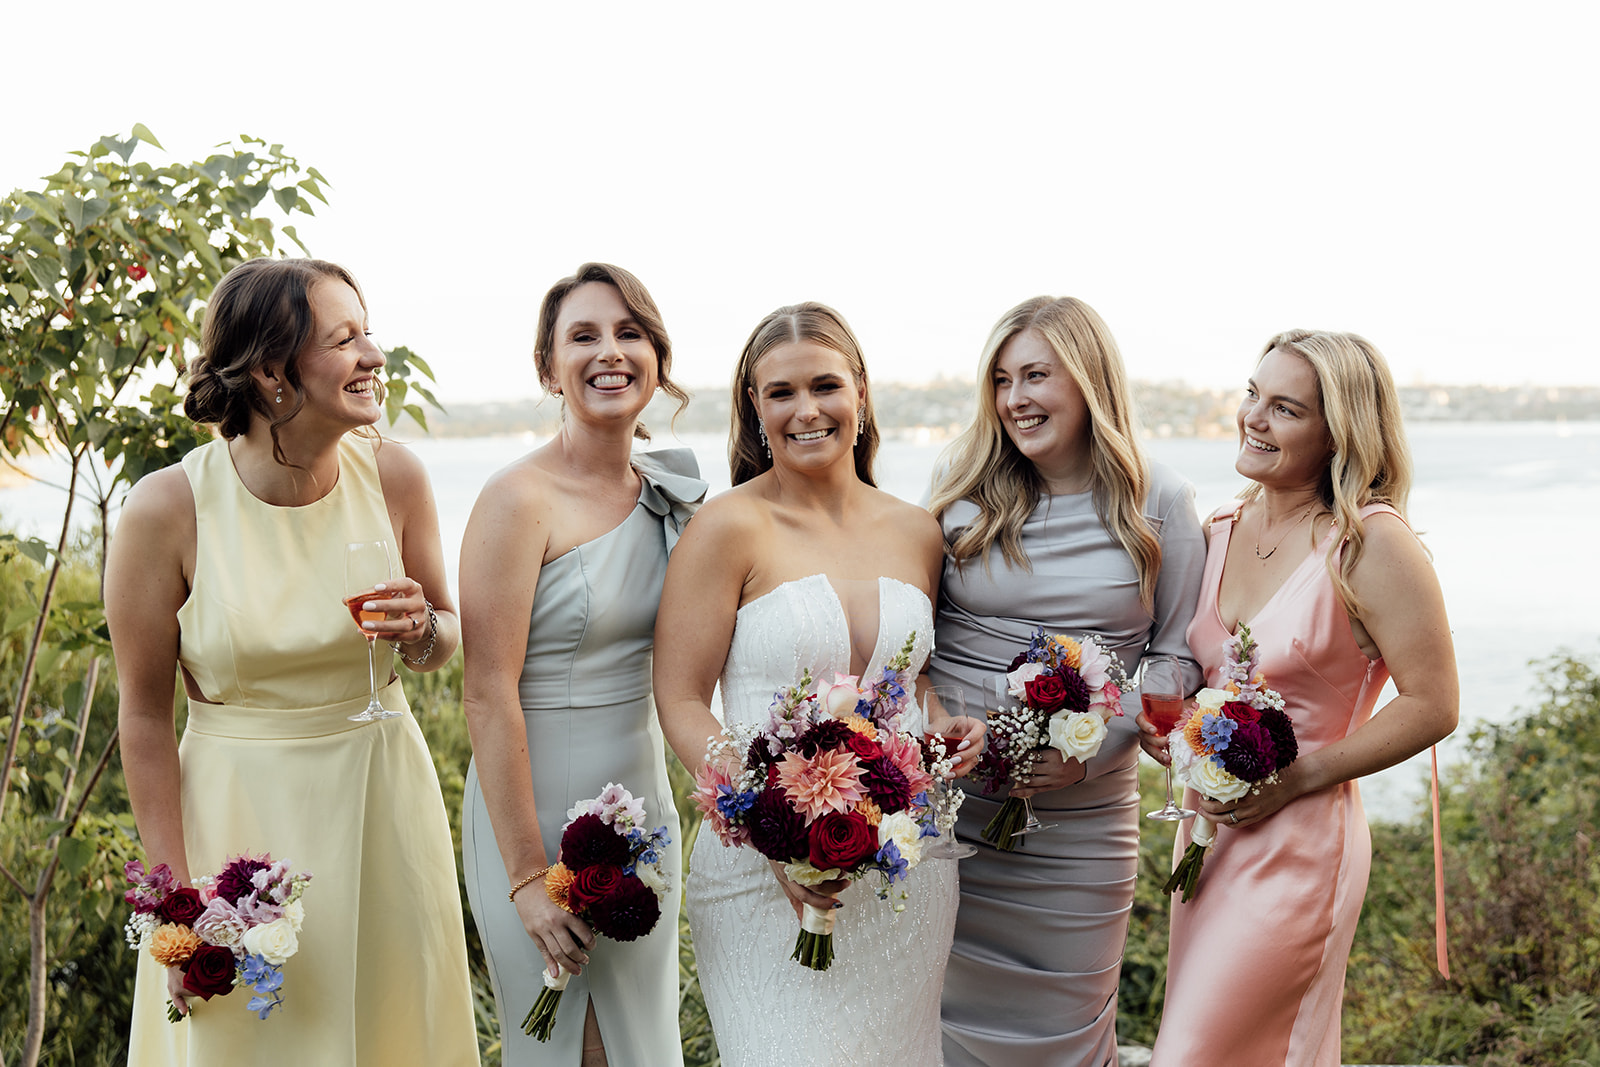 A bride and her bridesmaids laughing